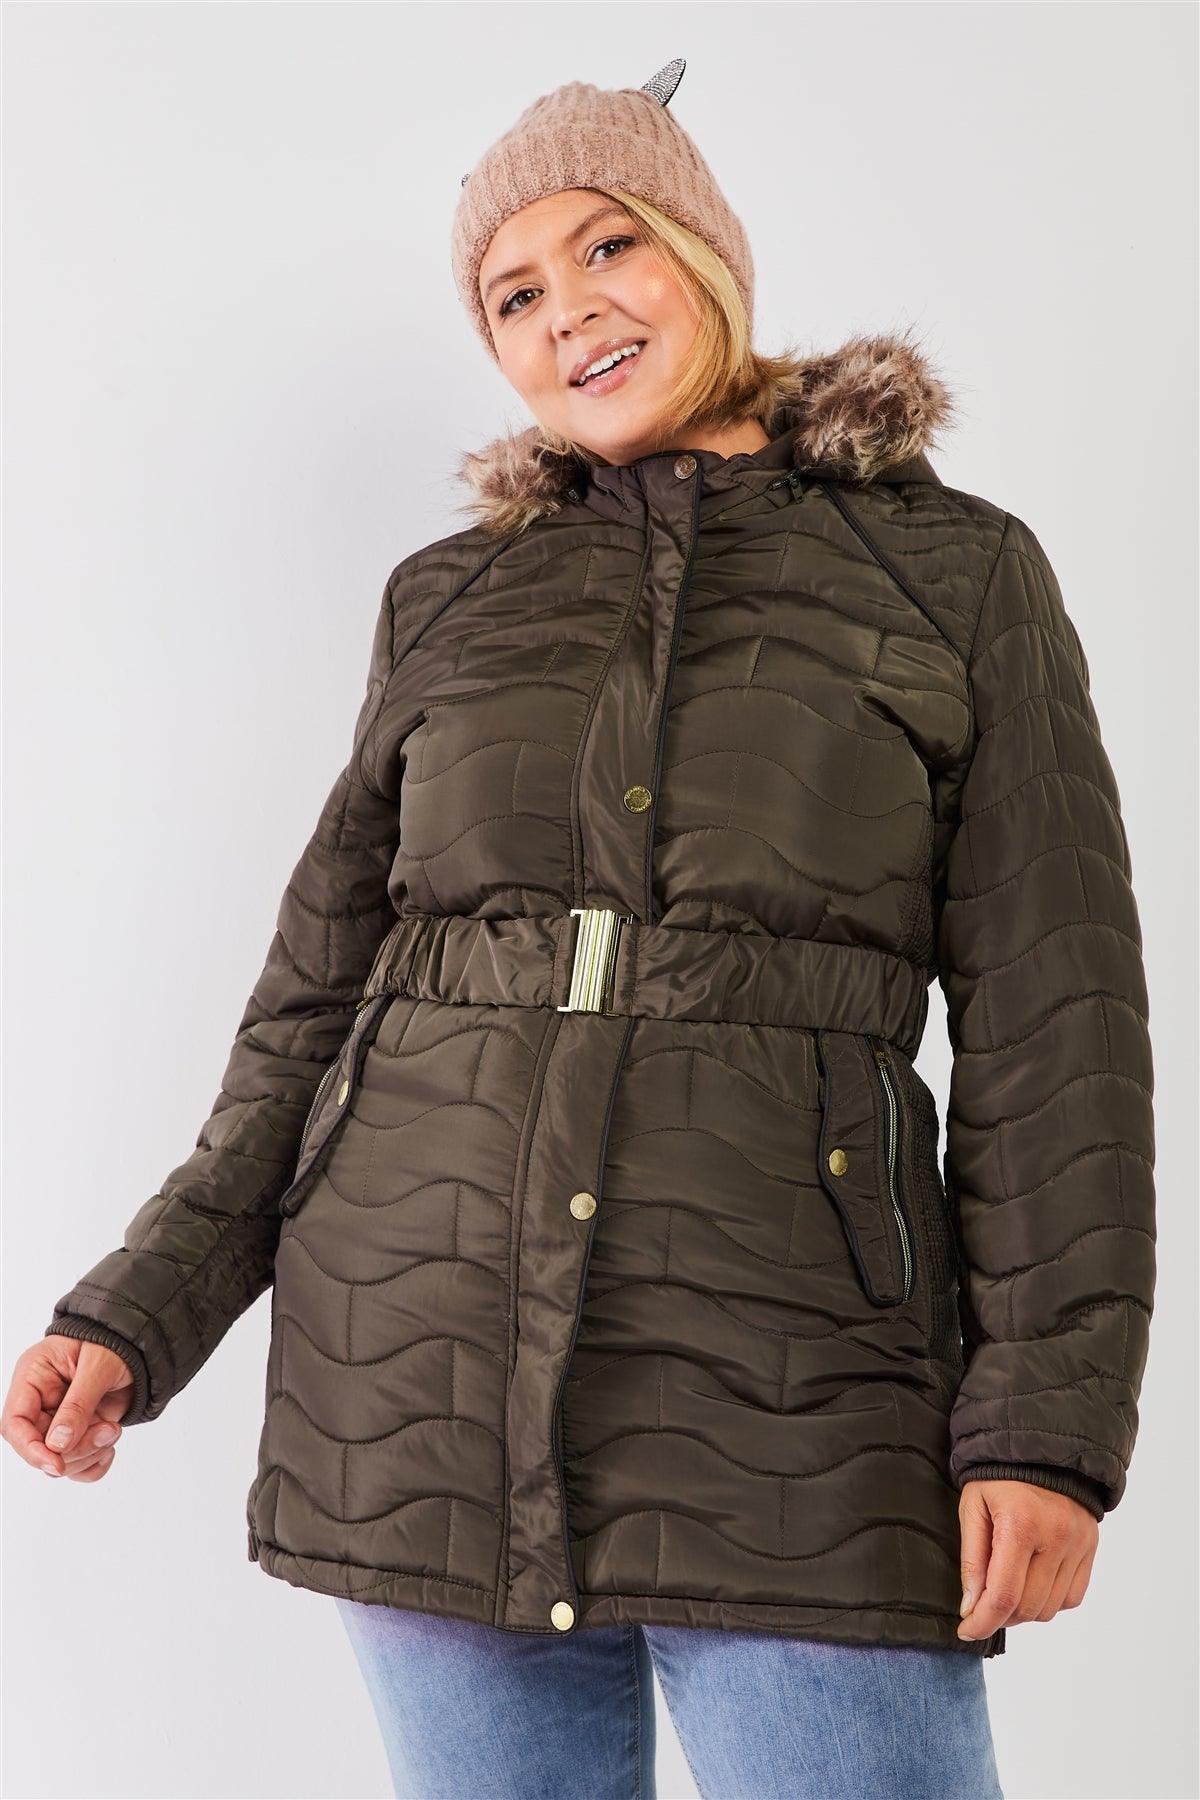 Junior Plus Olive Wavy Brick Quilt Faux Fur Hood Belted Padded Long Puffer Jacket